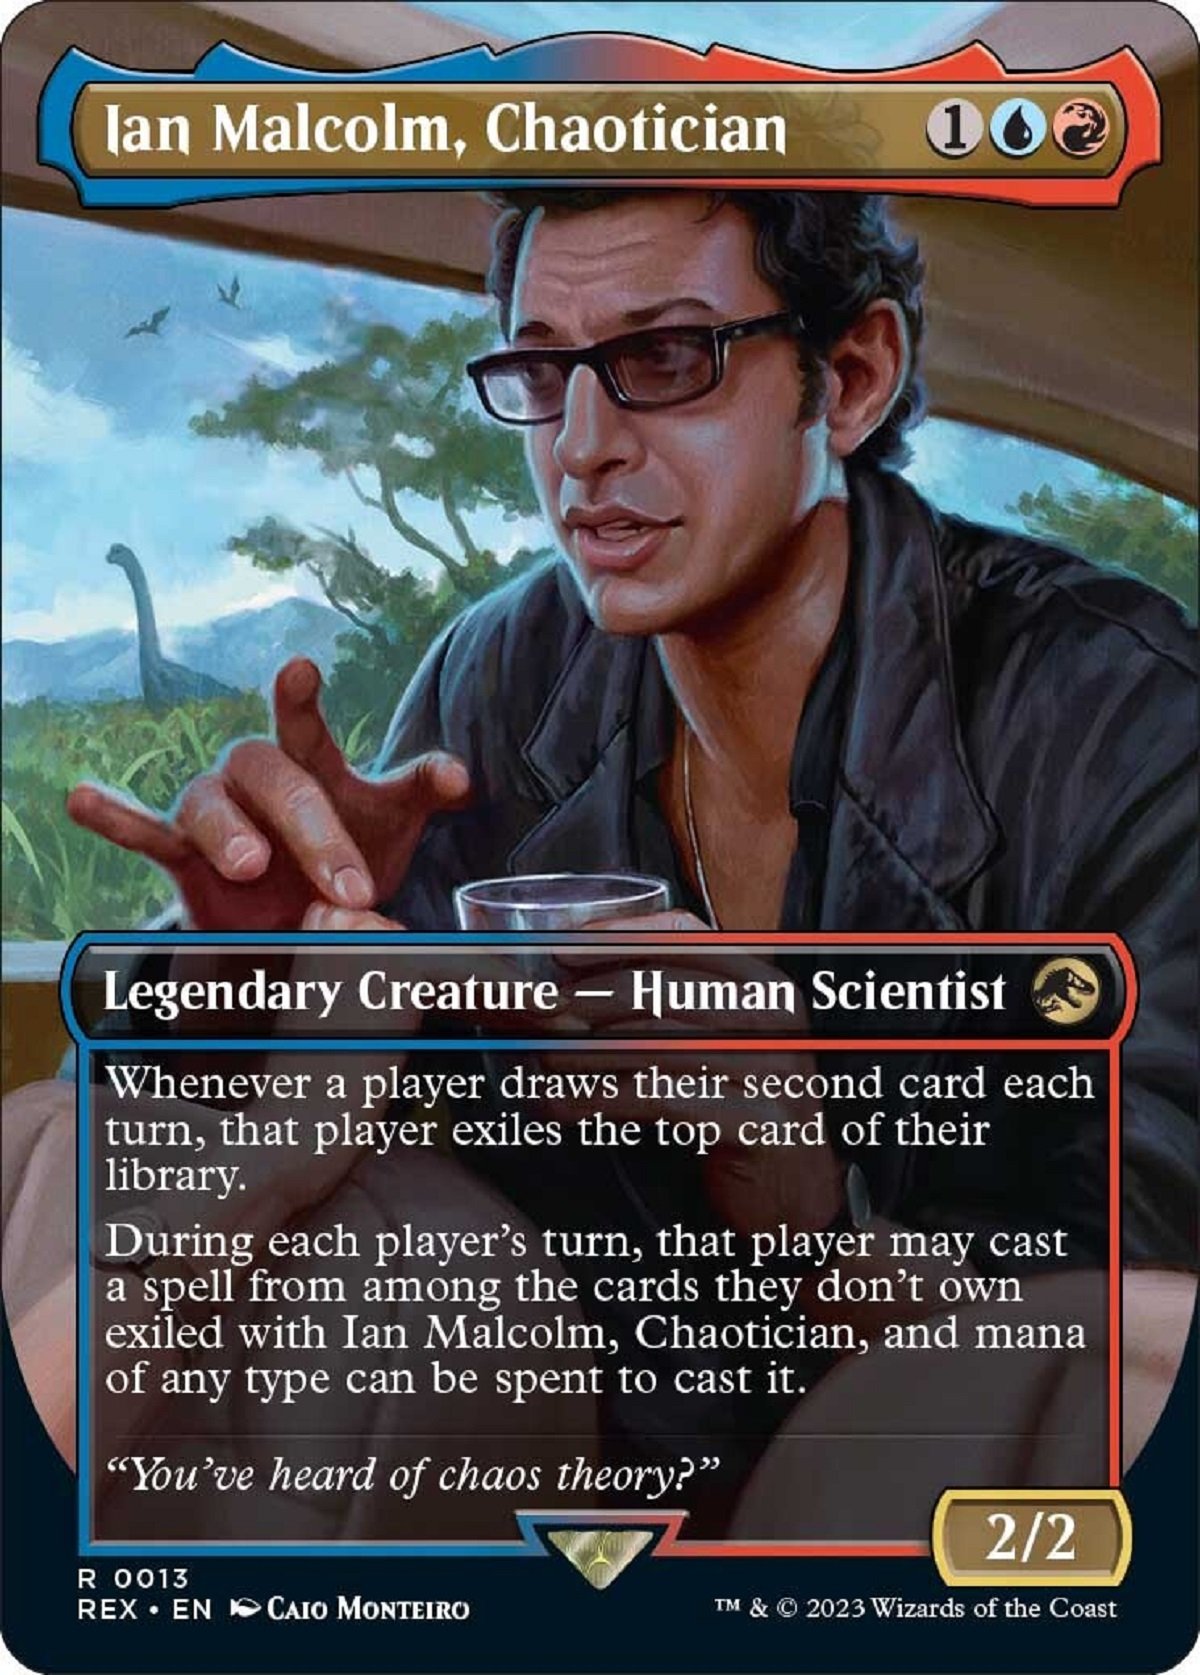 Wizards of the Coast's new Jurassic Park Dr. Ian Malcolm Magic: The Gathering card.